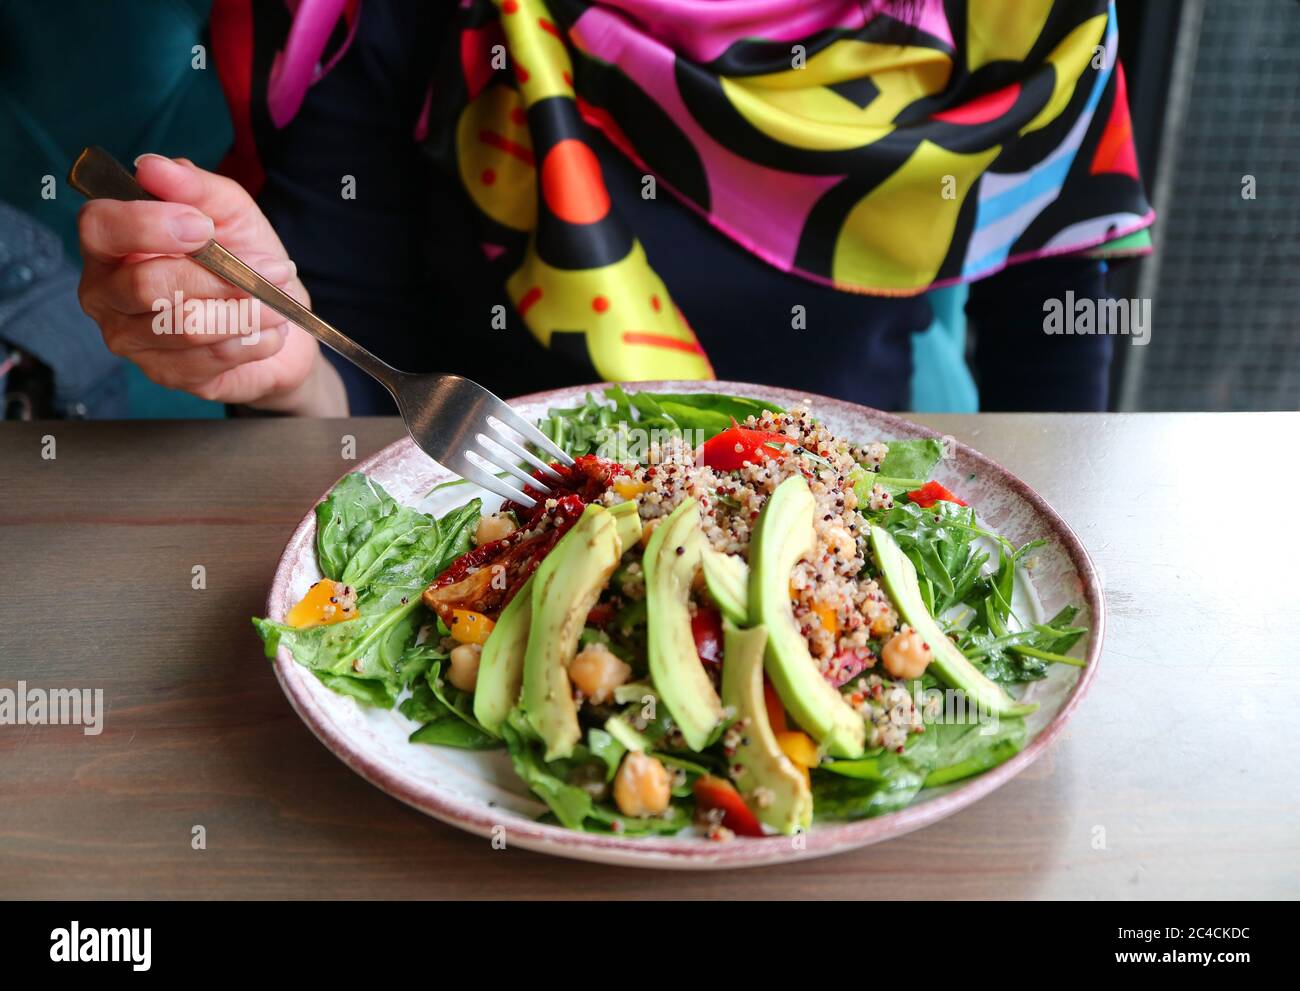 Female Eating Healthy Meal of Quinoa Salad with Avocado and Arugula Stock Photo